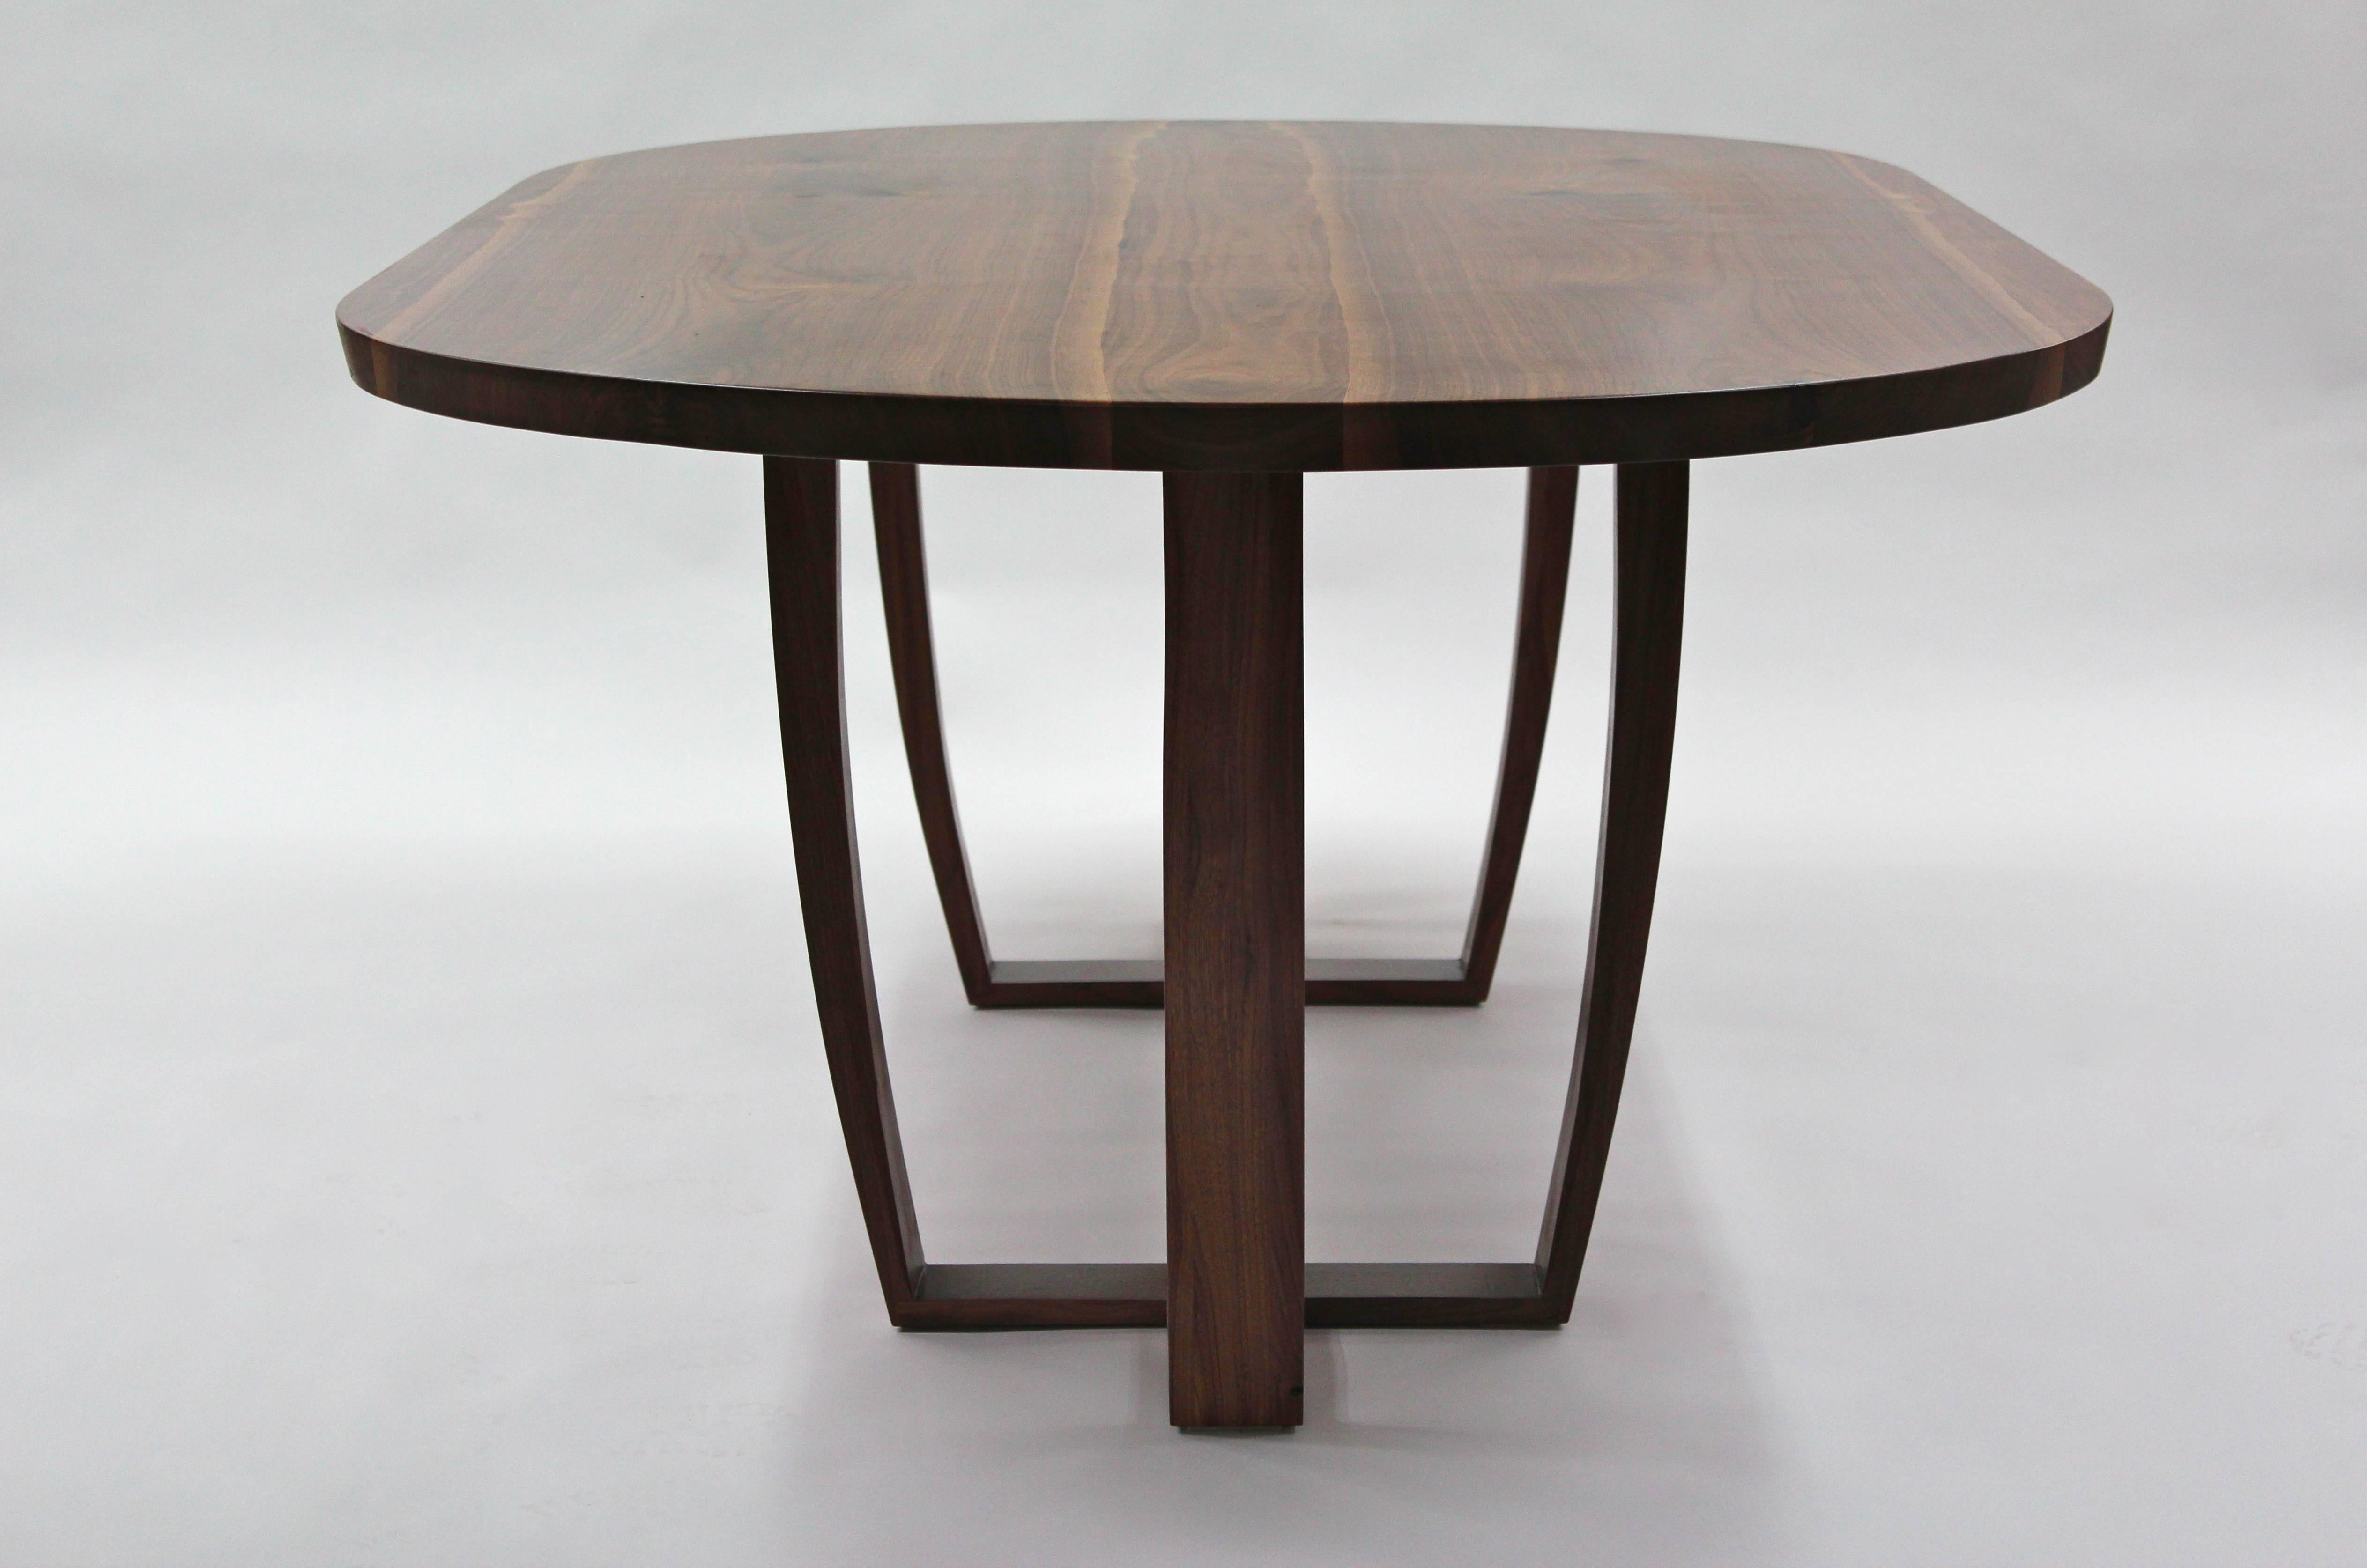 The top is made from two pieces of inverted, mirror image (bookmatched) 
American black walnut carefully cut into a central slab of walnut, the shape of the logs live edge is inset into the table top,  giving visual reminder of the tree that it came